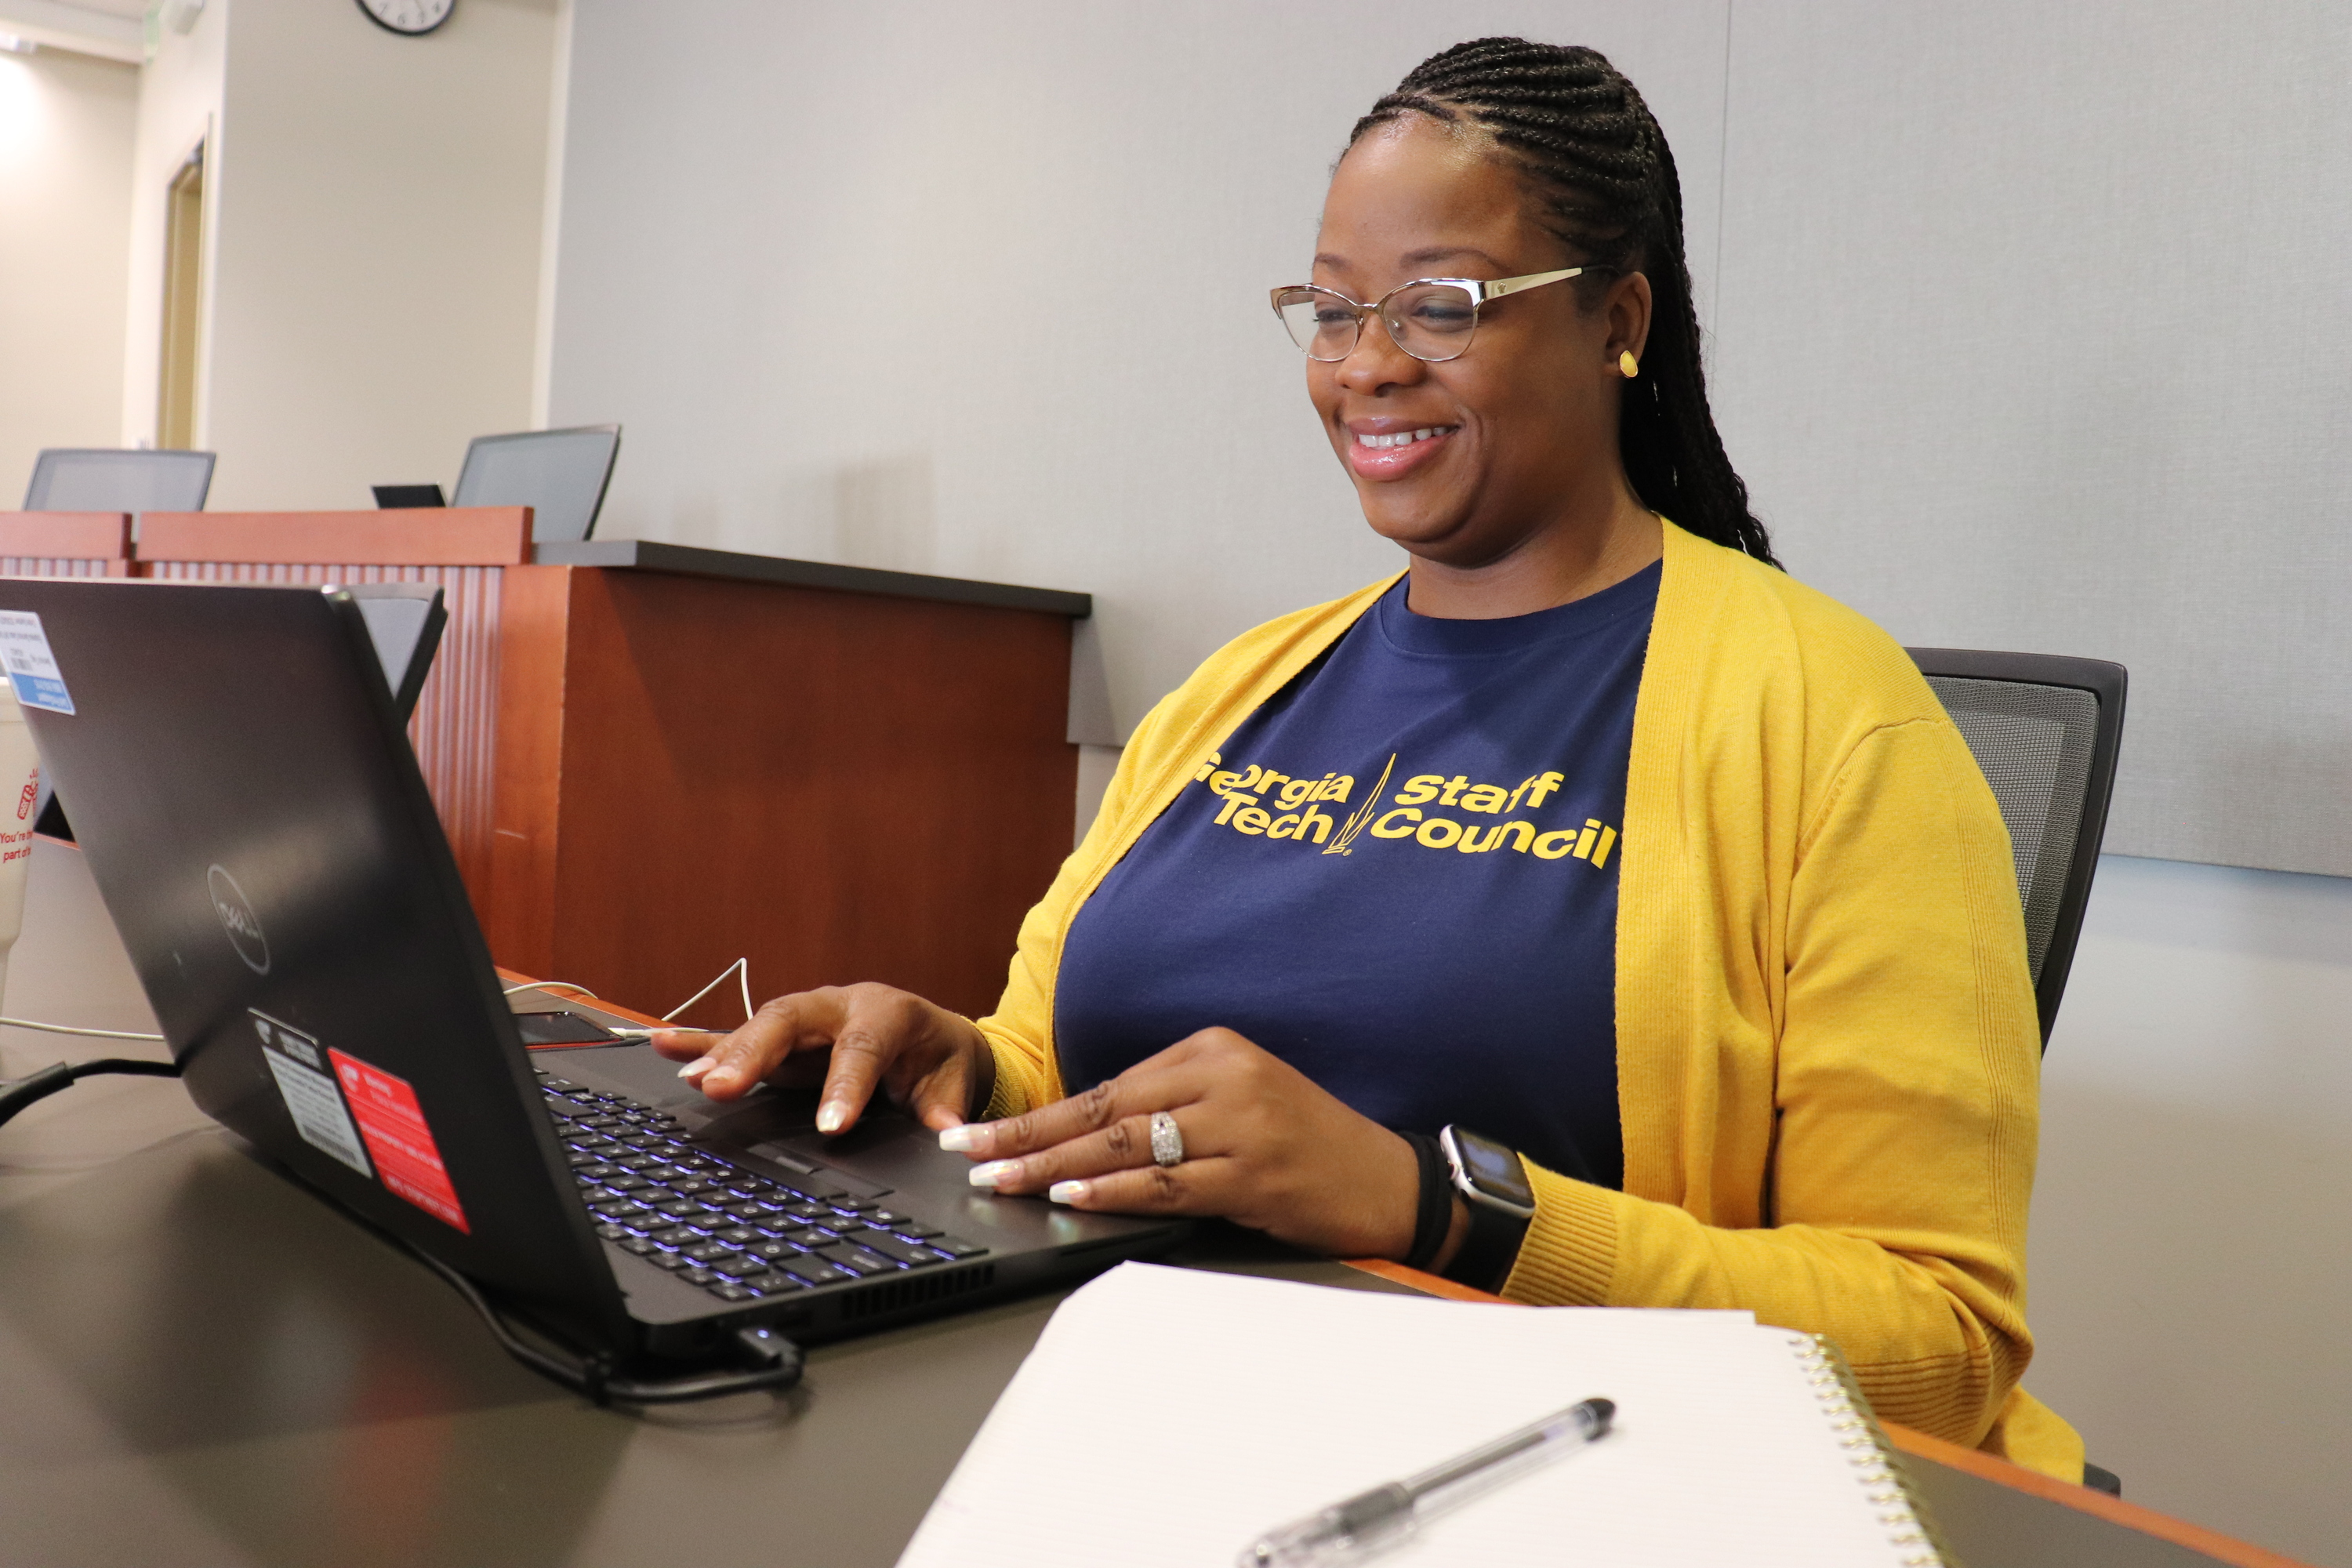 2021 Georgia Tech Staff Council Chair Quinae Ford prepares to welcome virtual attendees to the annual USG Staff Council Conference on Oct. 7.